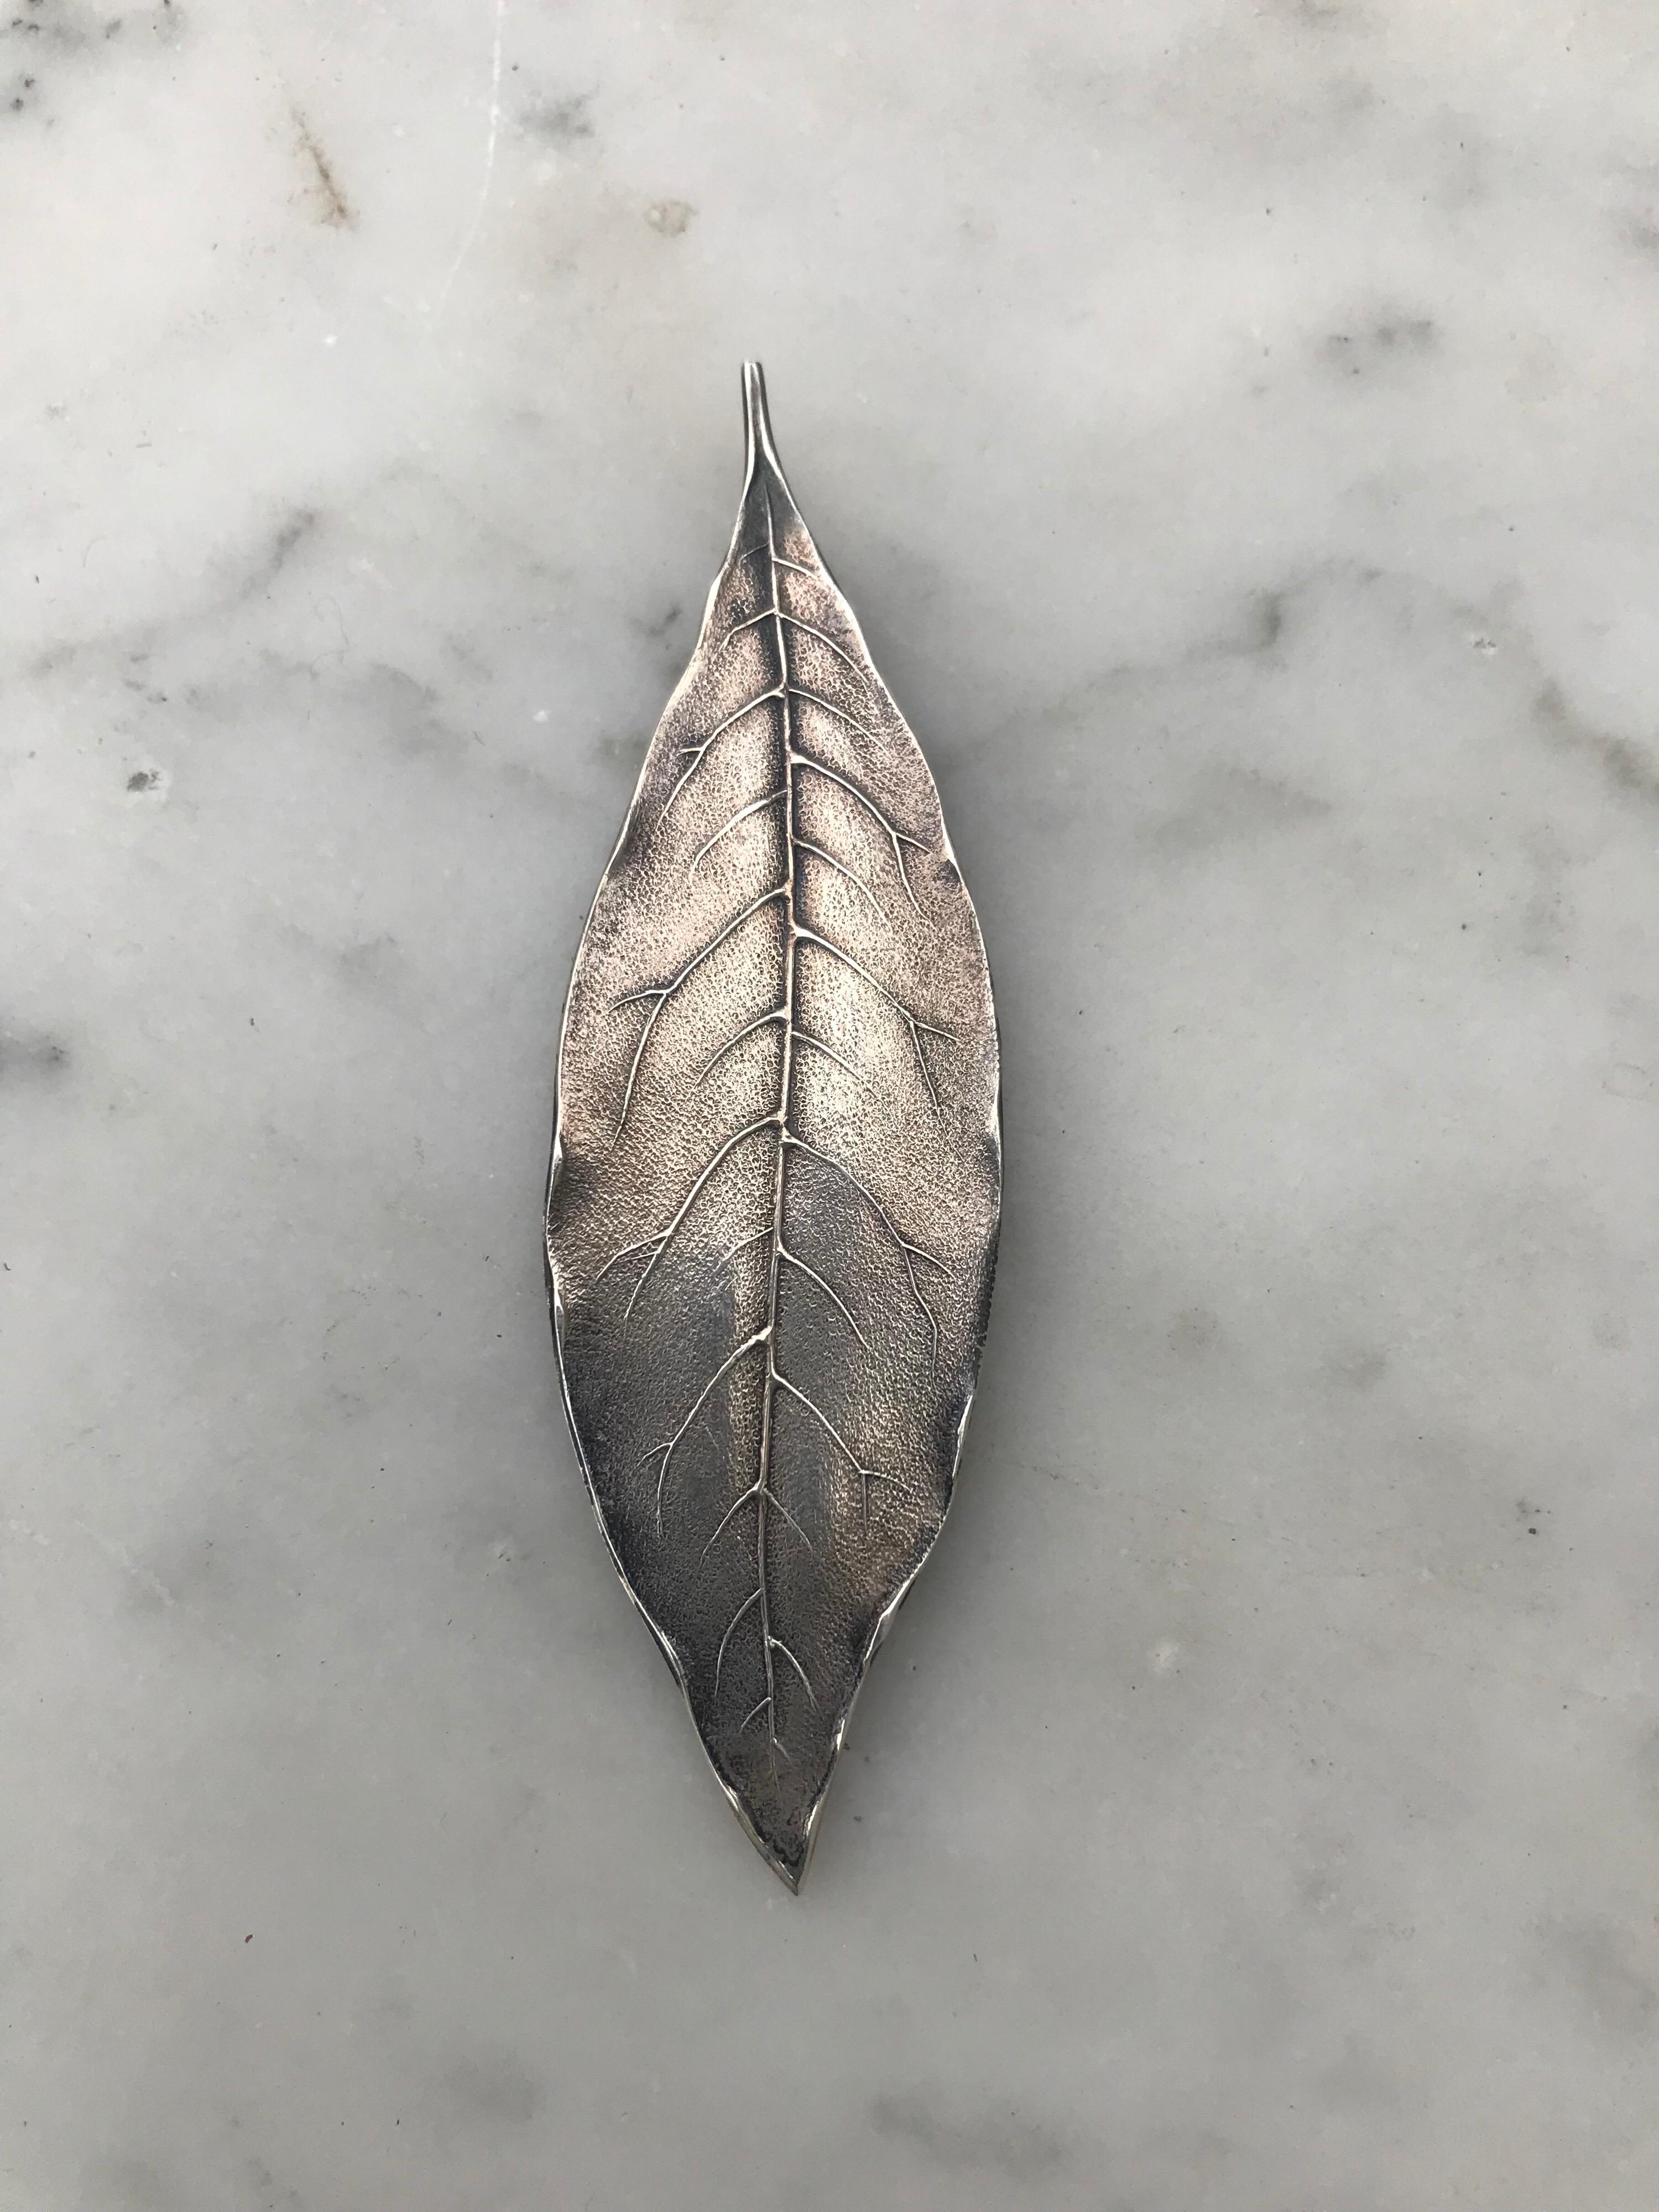 A brilliant sterling silver cast leaf form bookmark made by Tiffany and Co. Classic and timeless style.